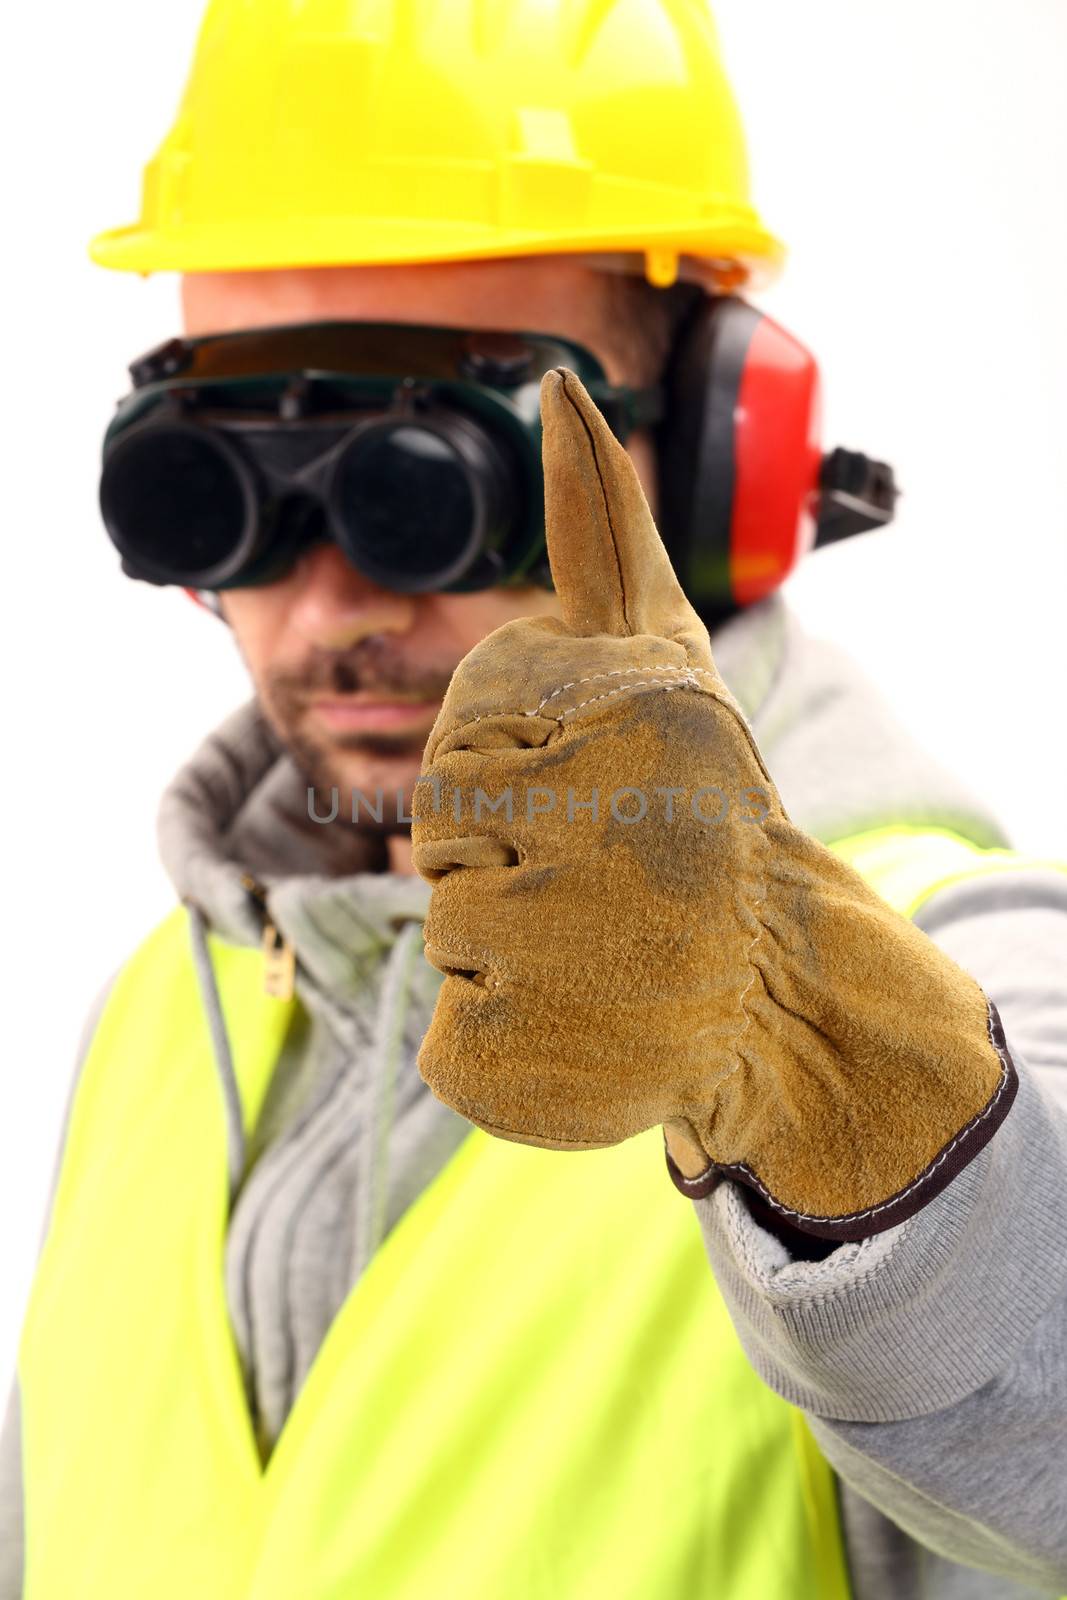 Worker with protective gear and thumbs up